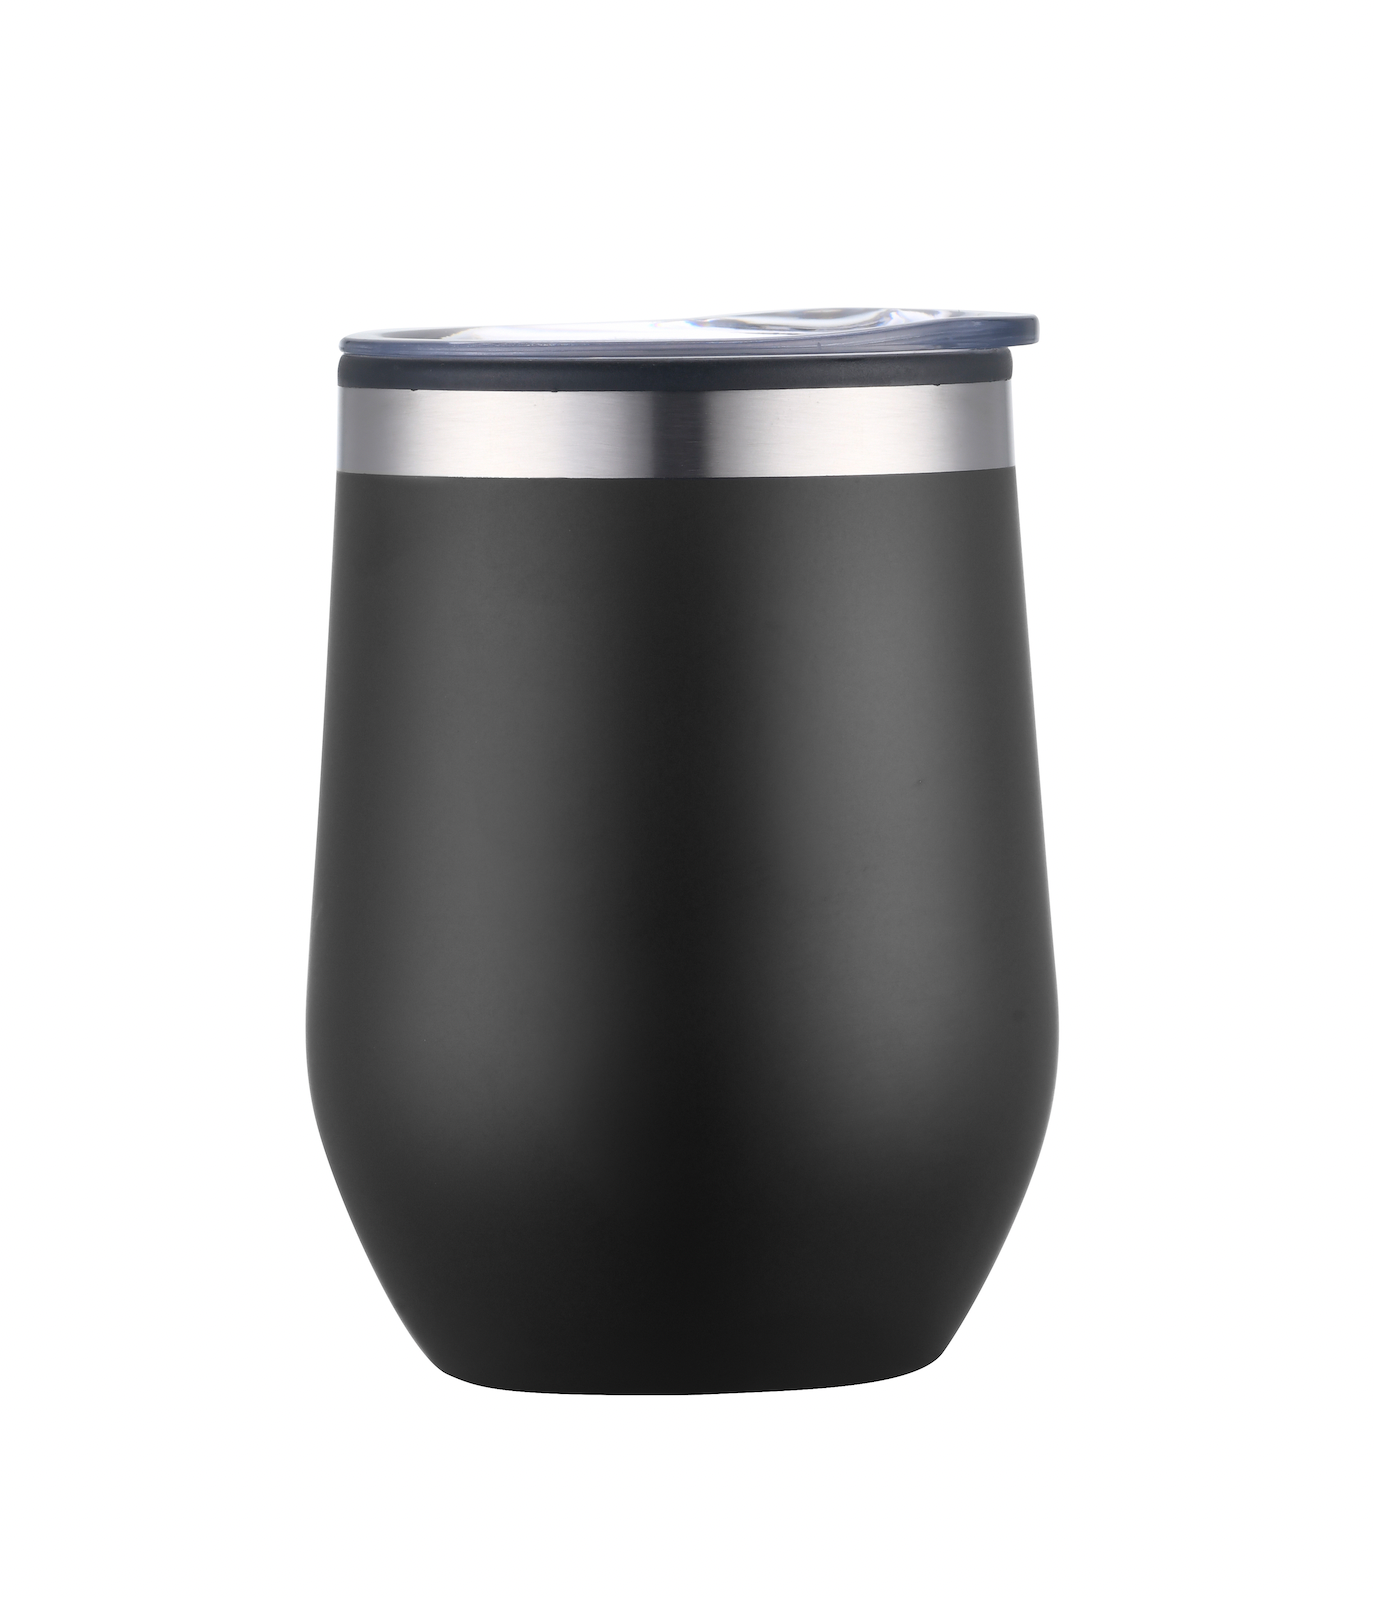 LS-206A – 12oz Double Wall Tumbler with Stainless Steel Rim